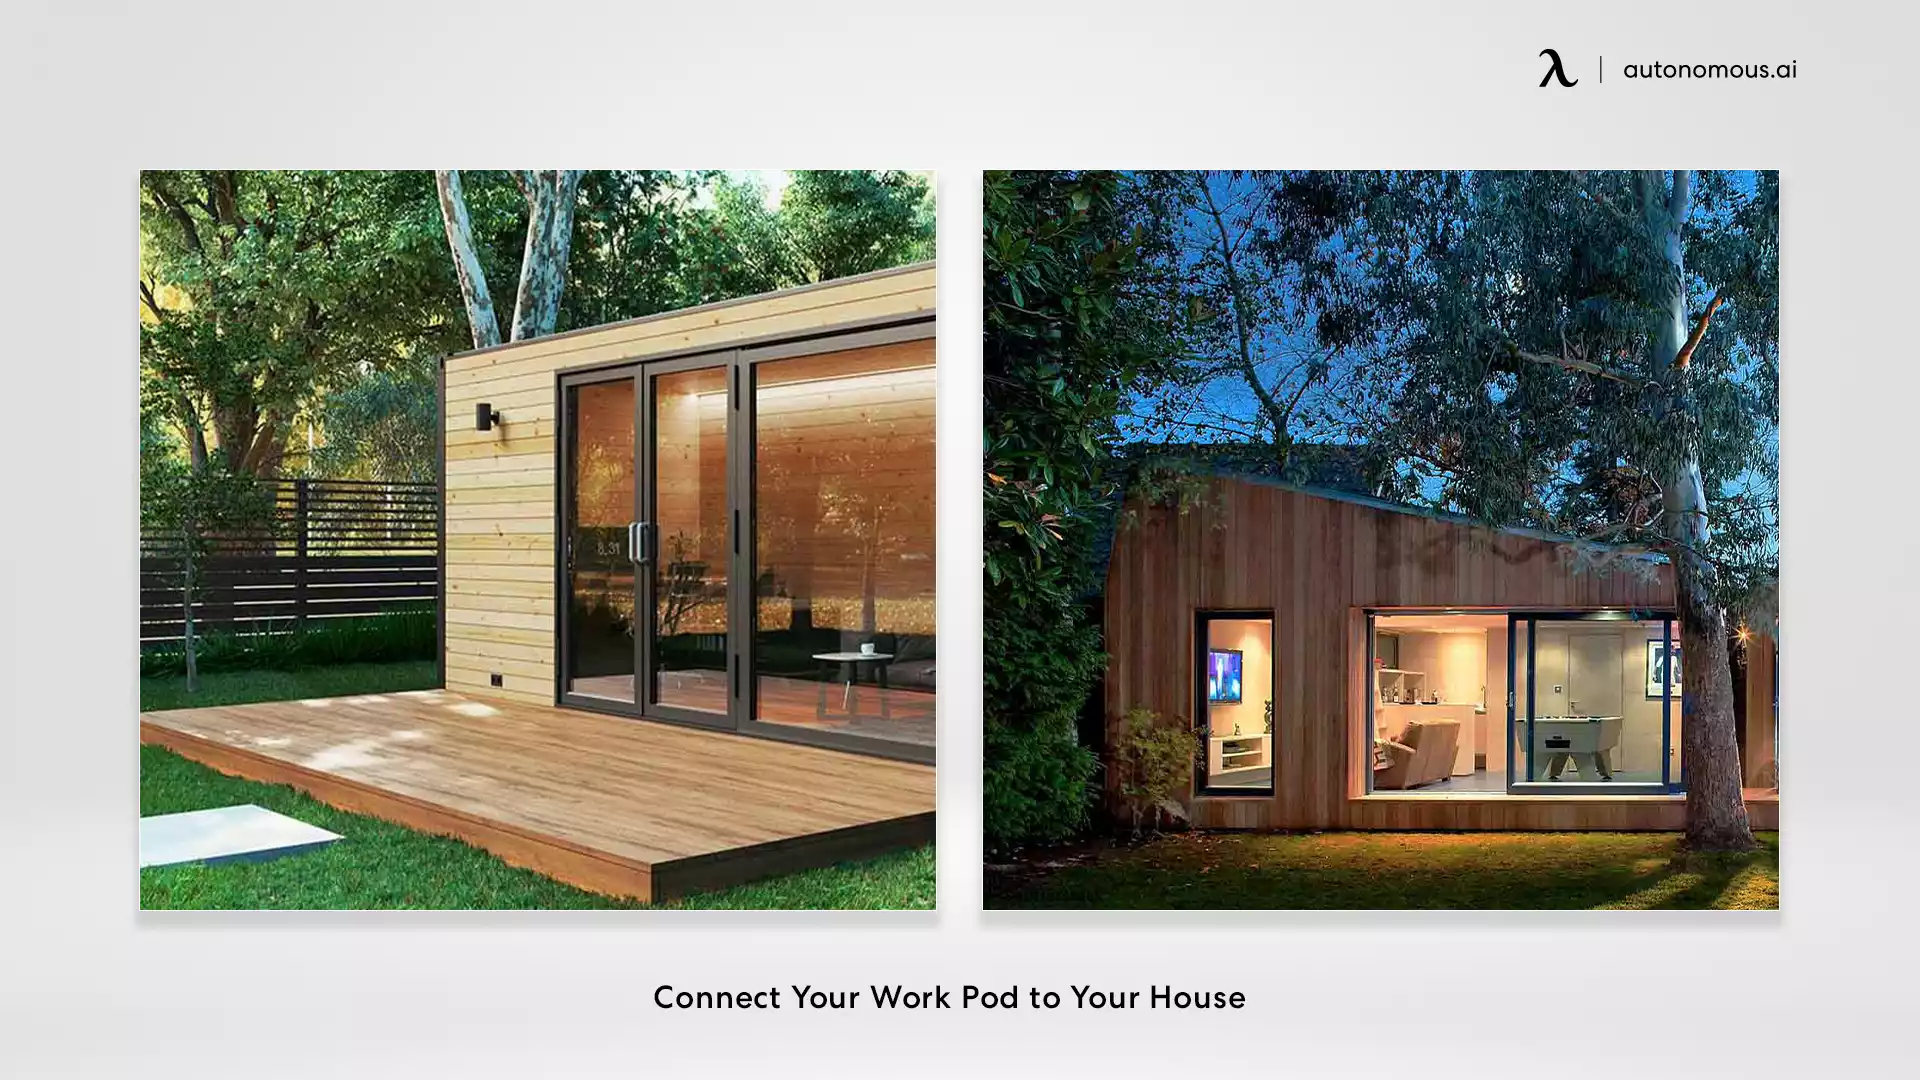 Connect Your Work Pod to Your House